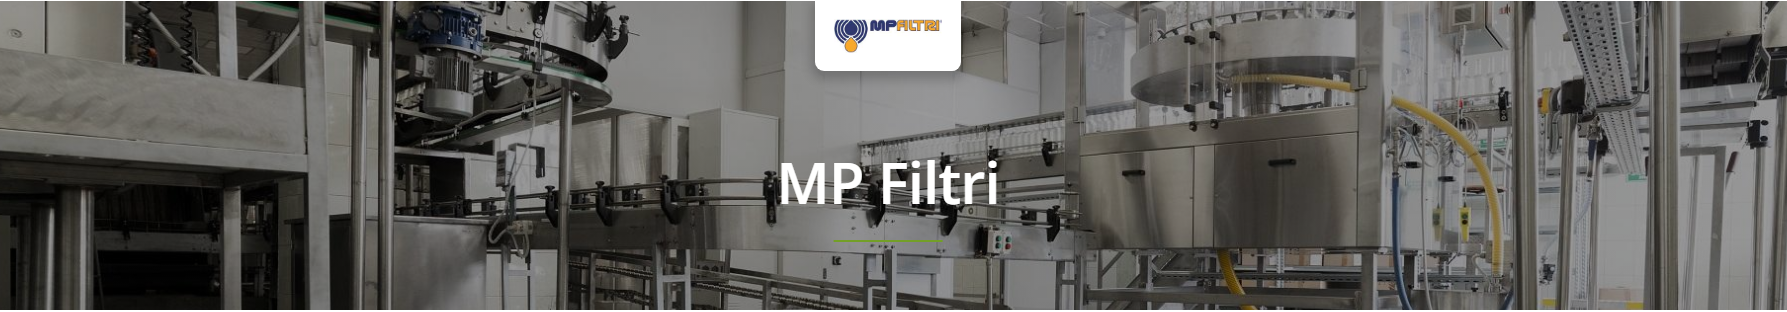 MP Filtri Stainless Steel Filters